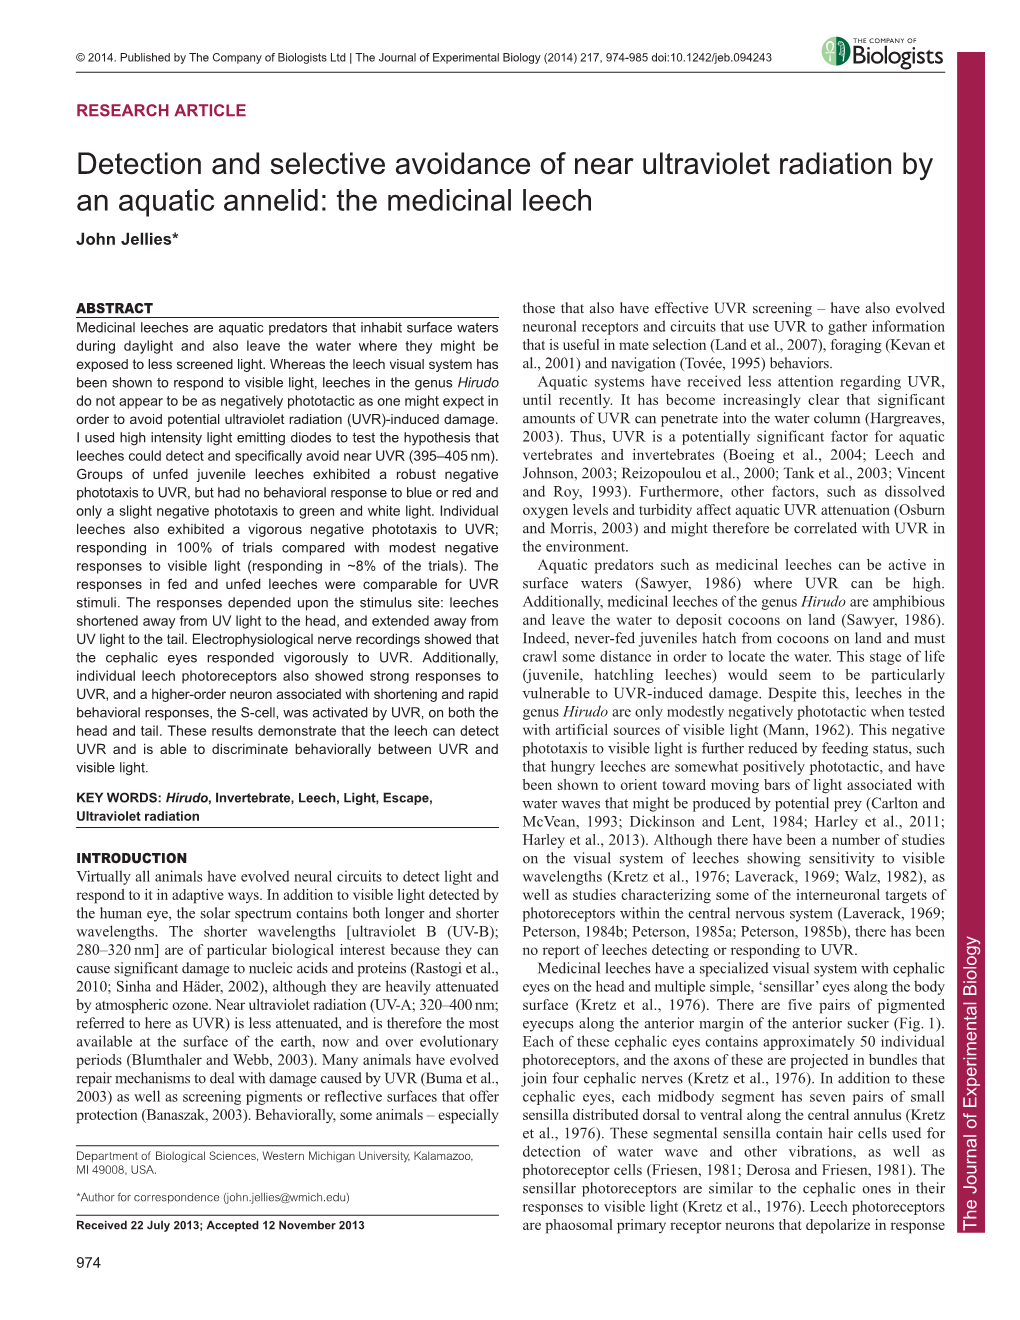 Detection and Selective Avoidance of Near Ultraviolet Radiation by An